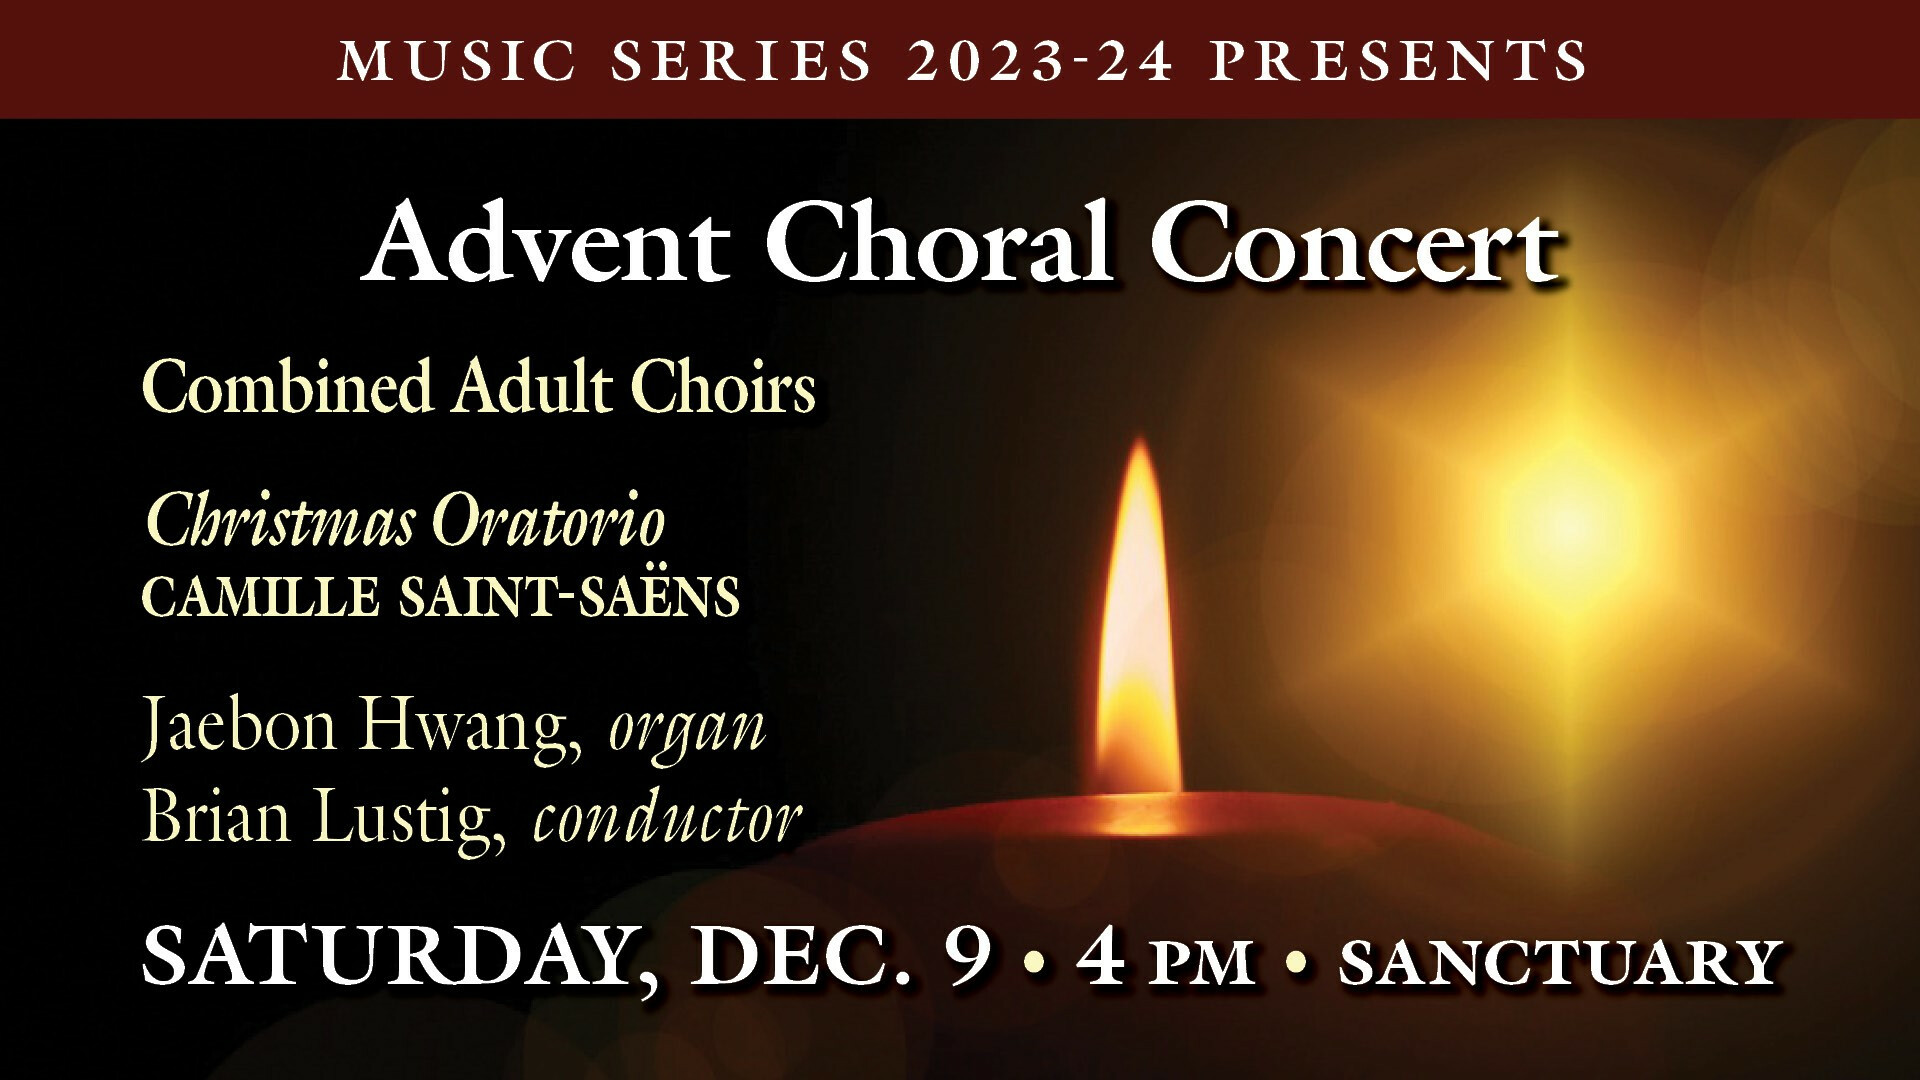 Advent Choral Concert